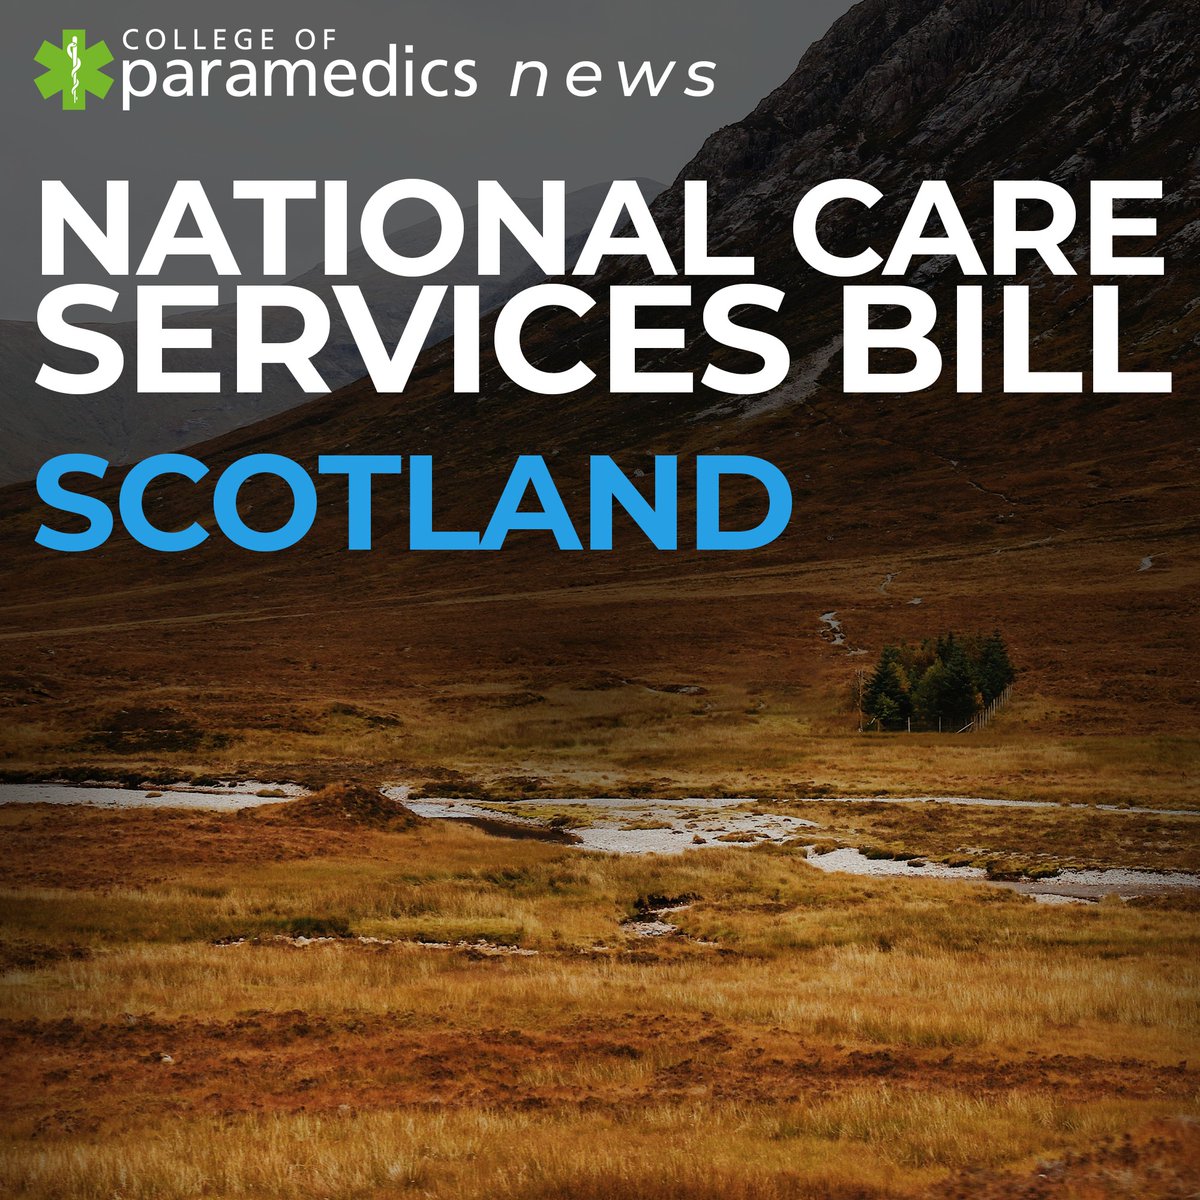 Scottish Parliament has agreed for the general principles of the National Care Service (Scotland) Bill, which aims ensure greater transparency in the delivery of community health & social care, improve standards, & strengthen the role of the workforce. 👉 bit.ly/3wYKBZO